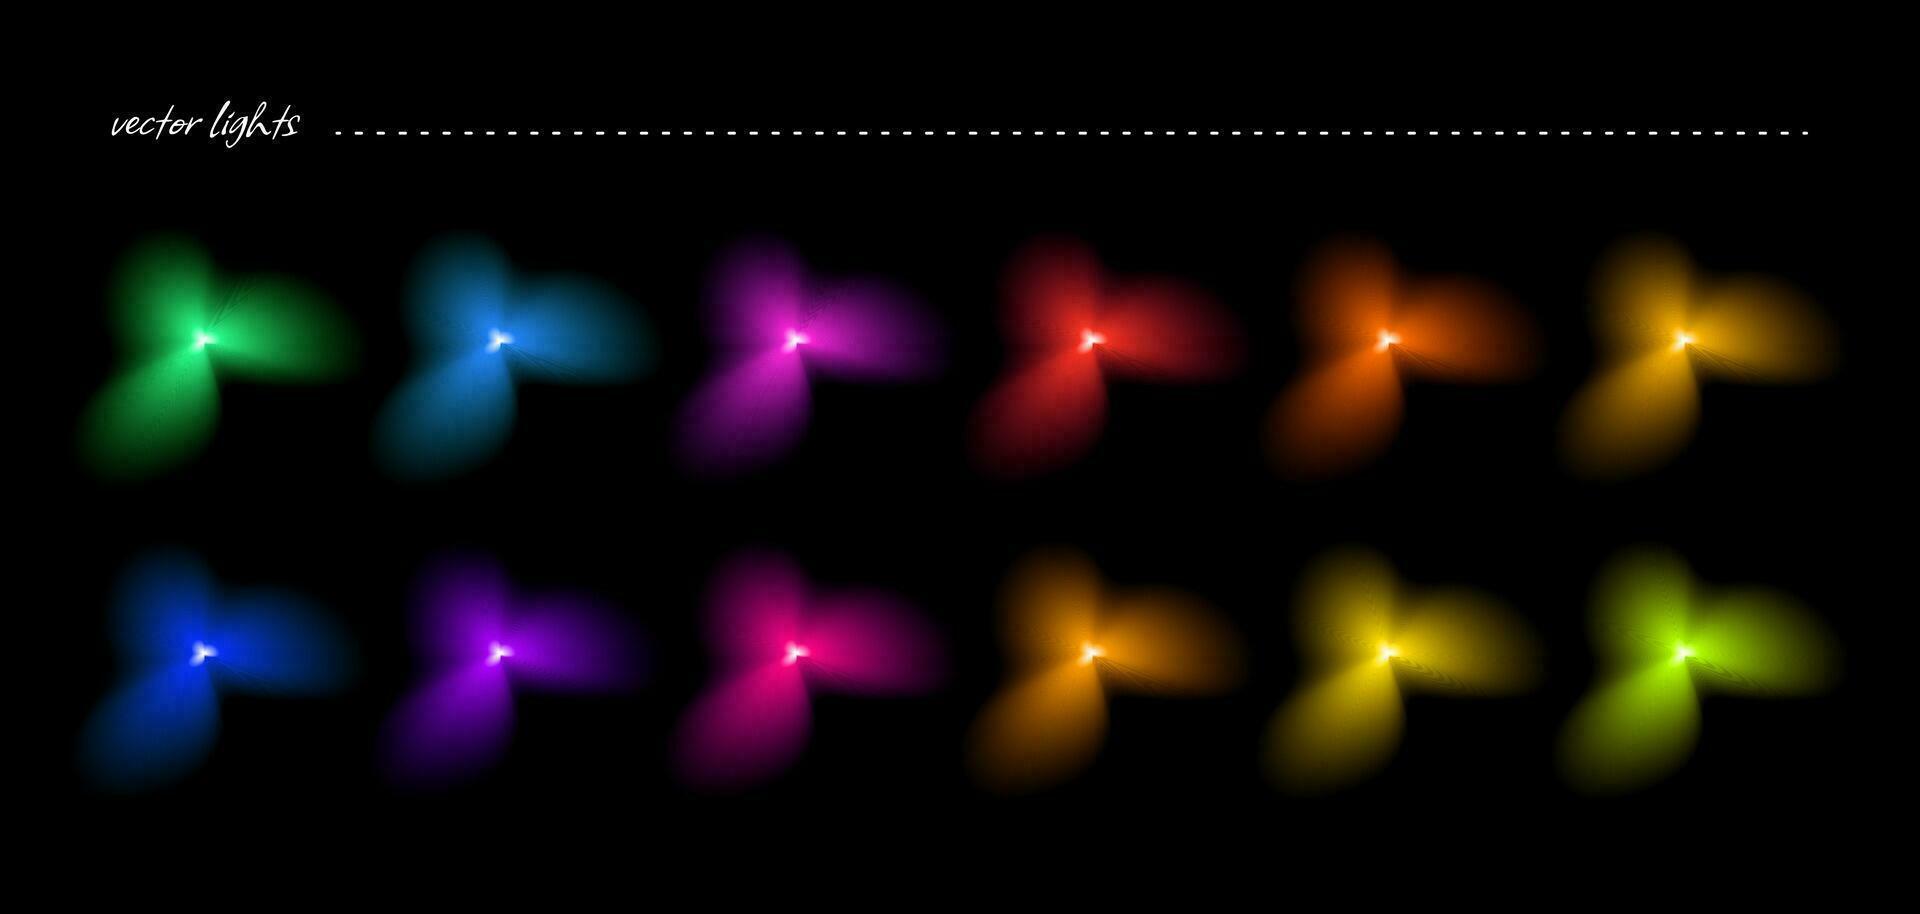 Collection of different vector lights and blurred sparkles of colorful light, vector decoration elements.